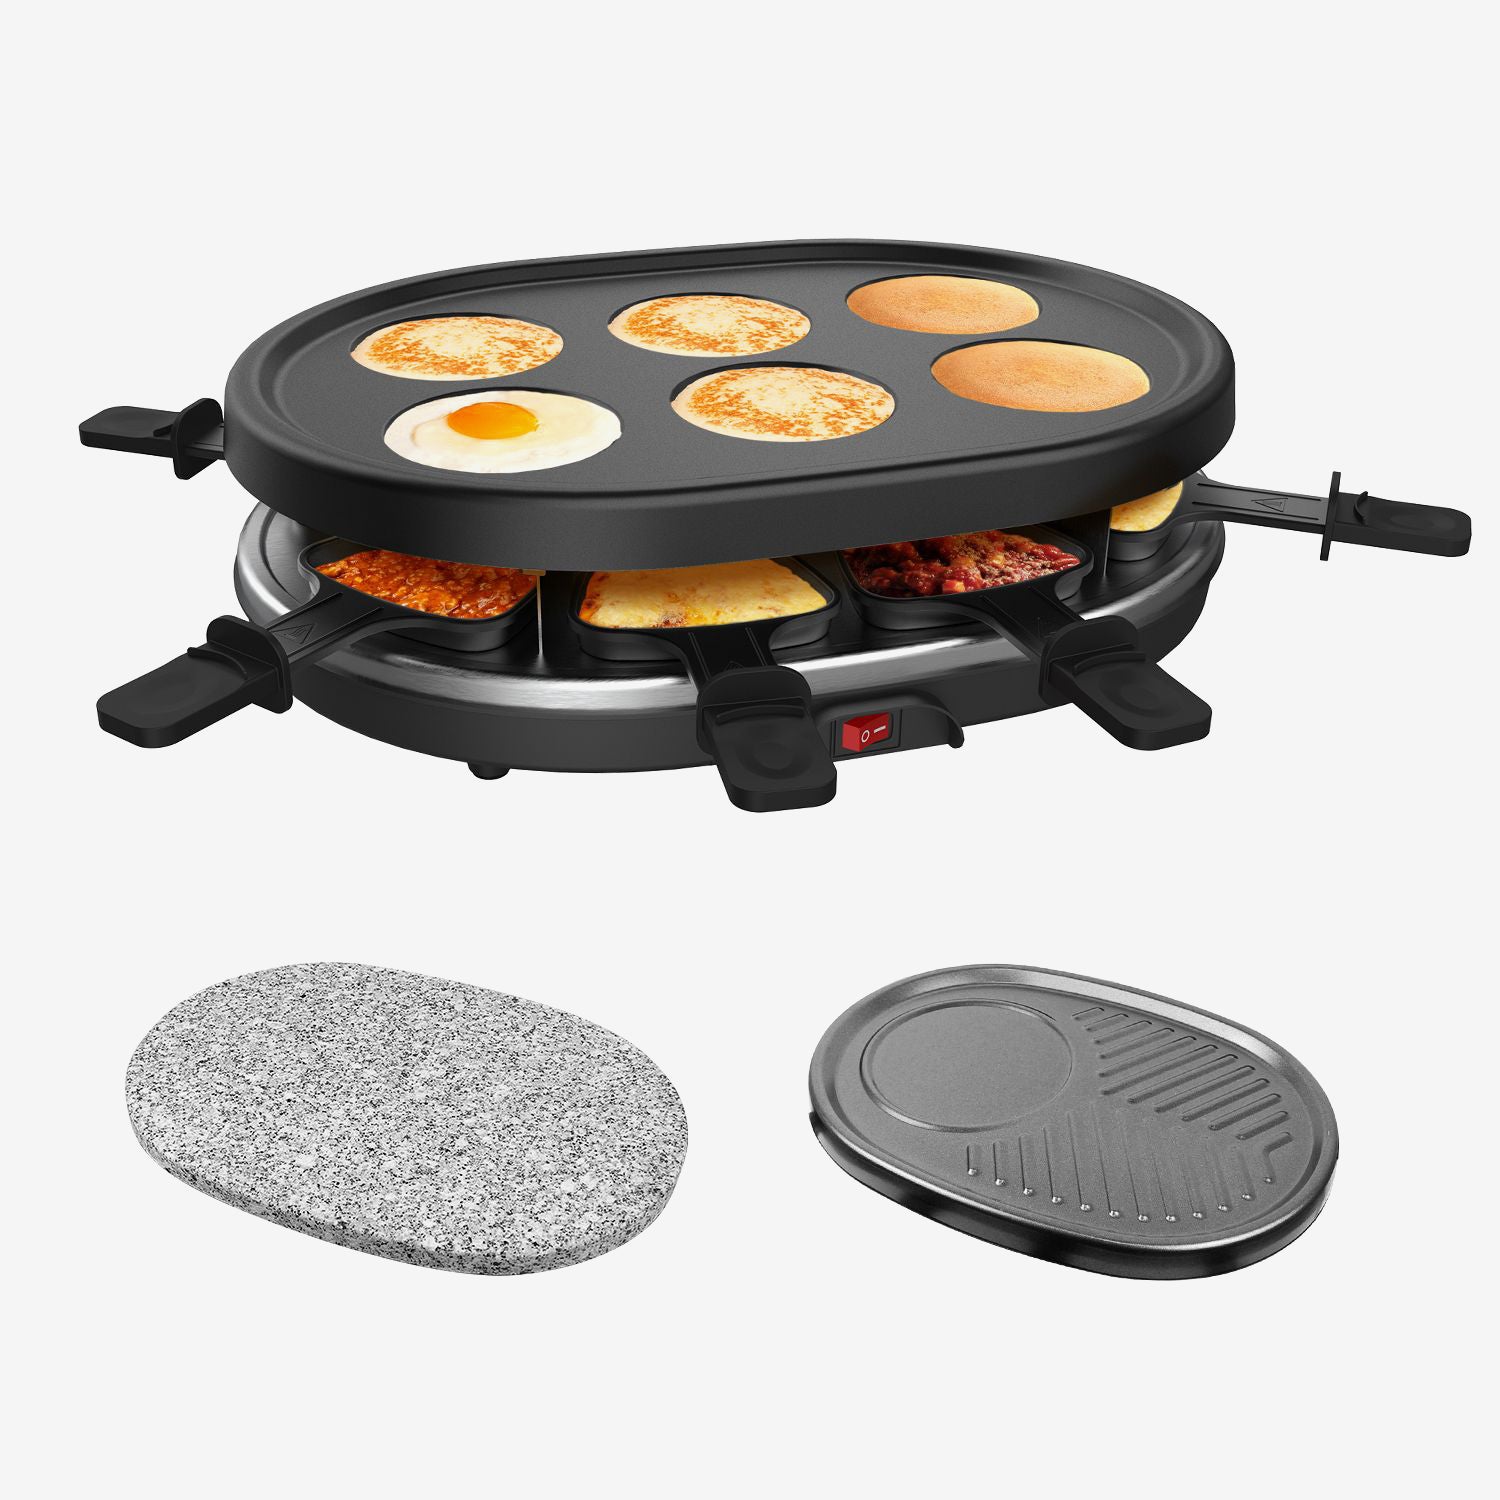 3-in-1-Raclette-Set-Natural-Stone-Grill-Black-Complete-set-of-cooking-plates-Material-304-stainless-steel